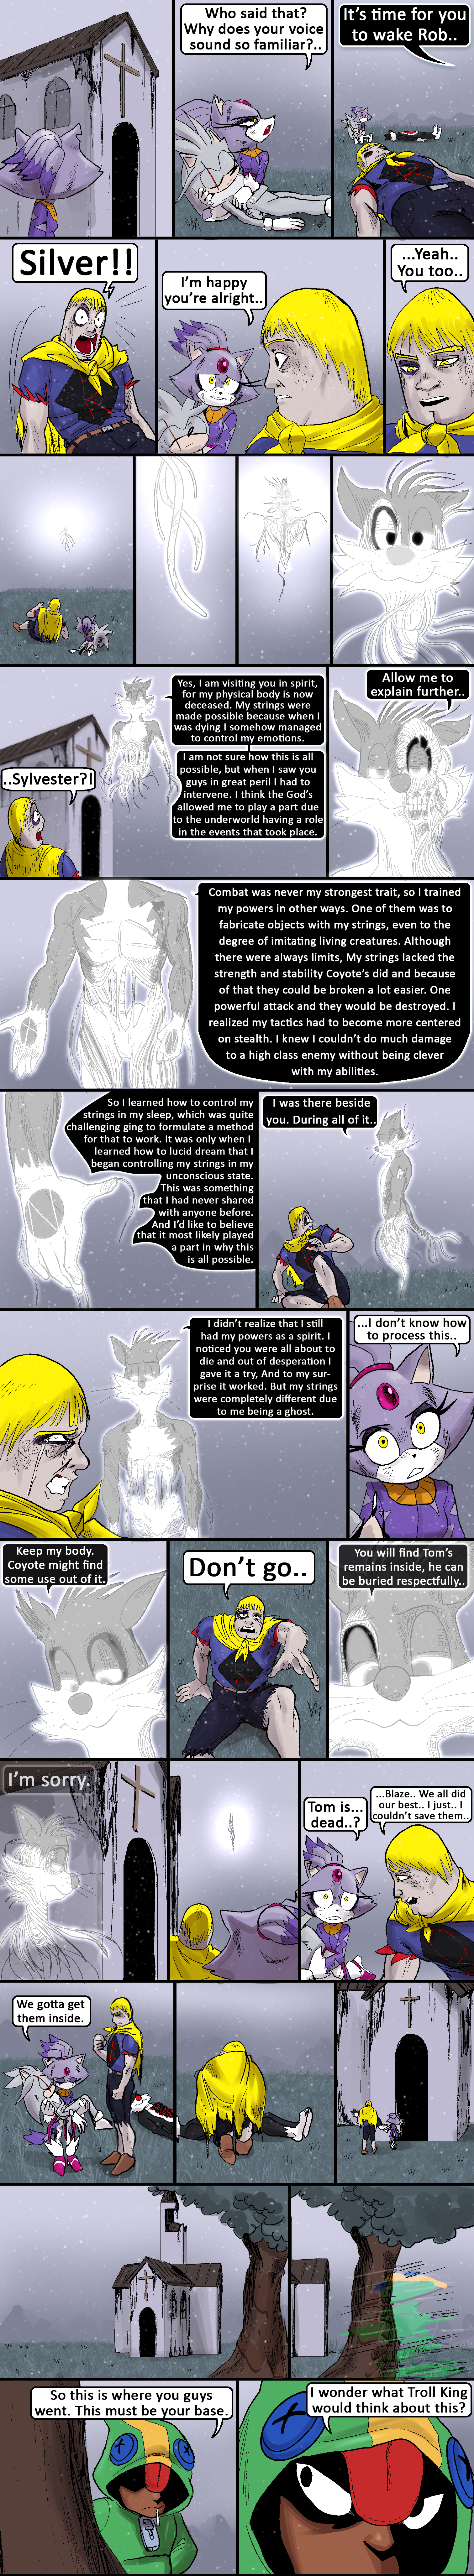 ch26/pg35.png. If you're seeing this, enable images. Or, perhaps we have a website issue. Try refreshing, if unsuccessful email commodorian@tailsgetstrolled.org with a detailed description of how you got here.